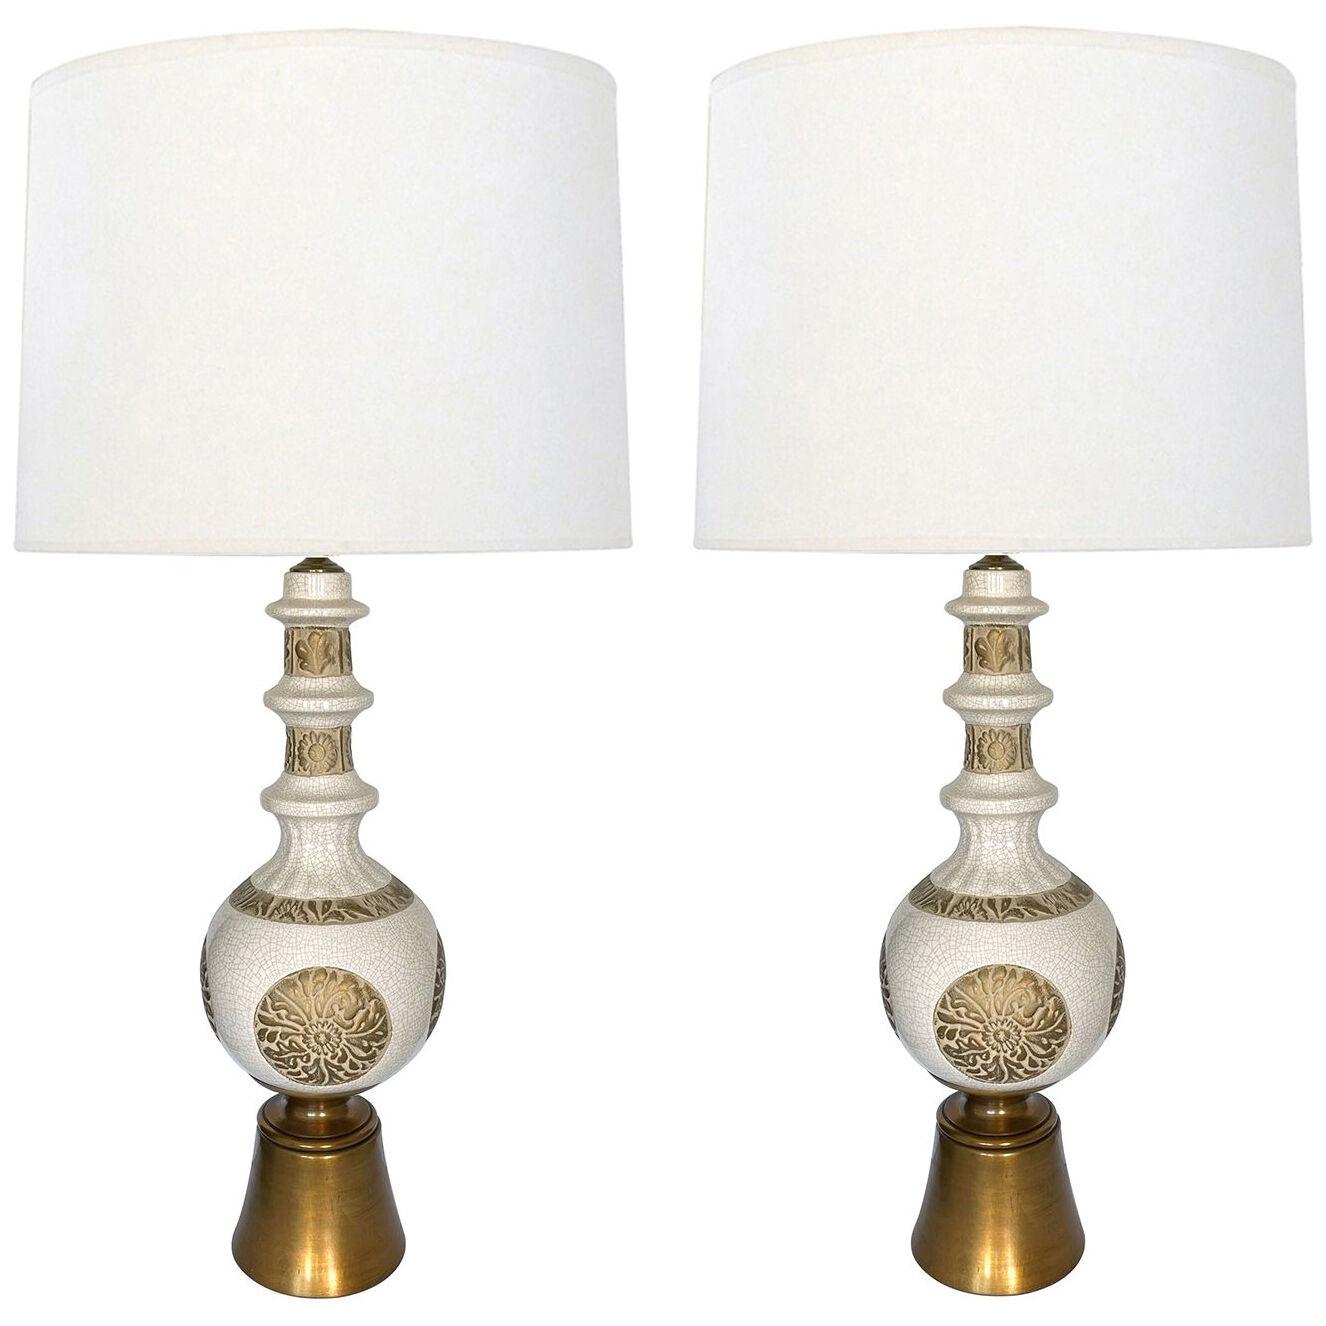 Tall and striking pair of ivory crackle-glaze ceramic baluster-form lamps